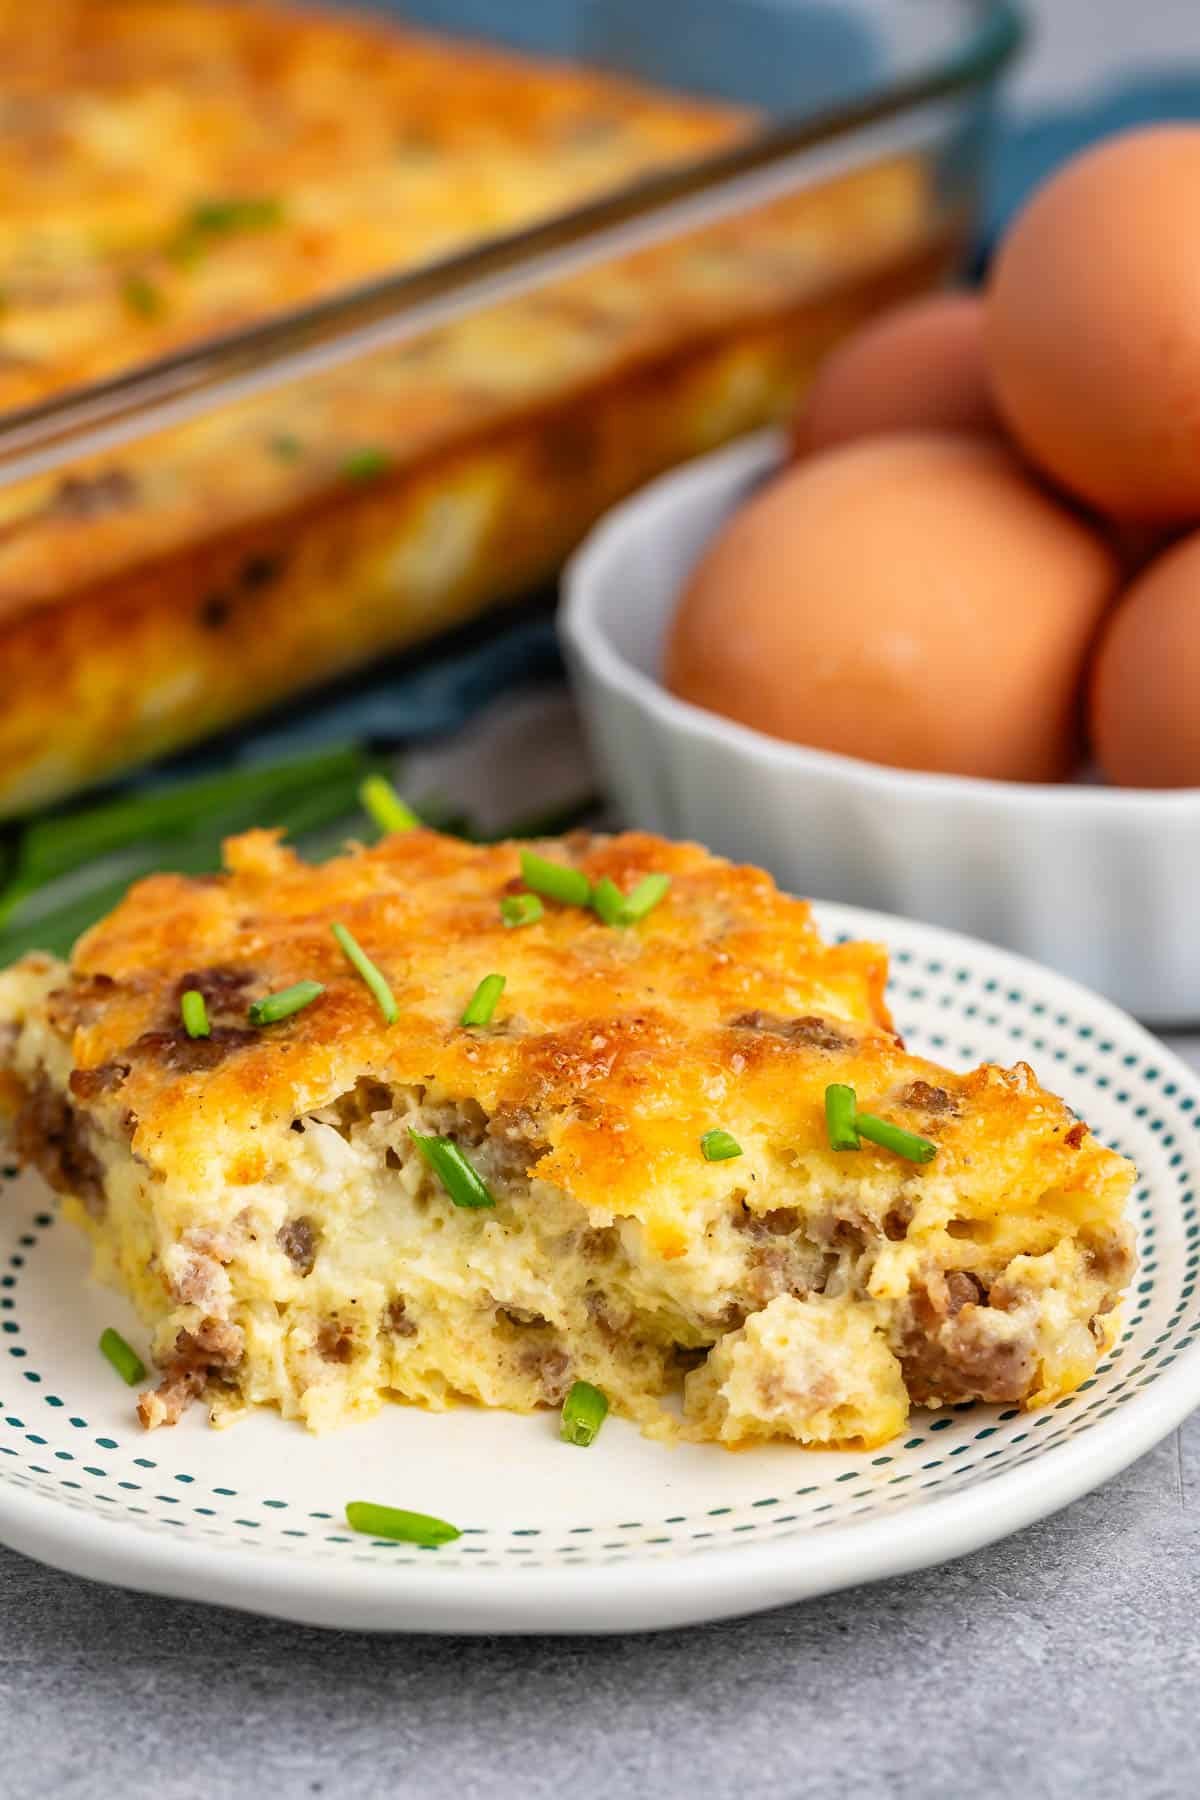 egg casserole with sausage baked in on a white plate.